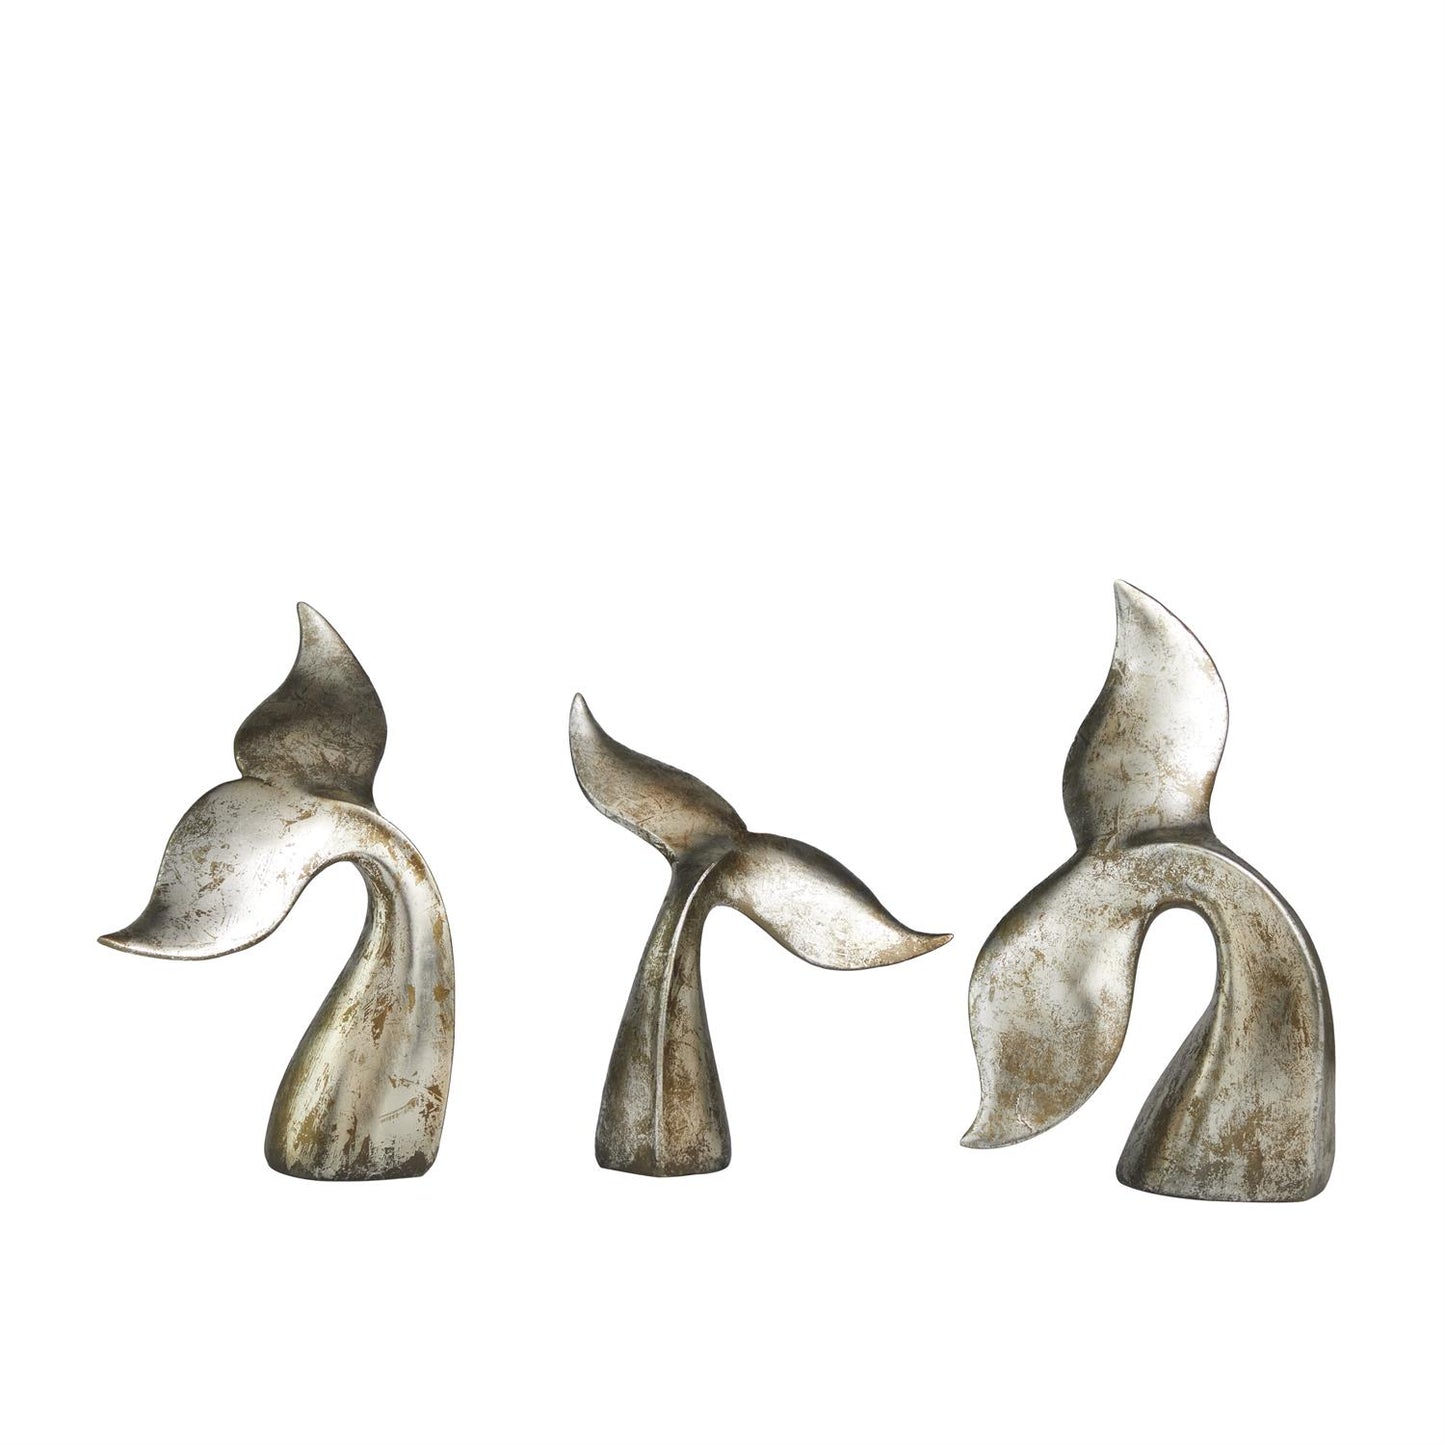 Distressed Silver Whale Tail Sculpture